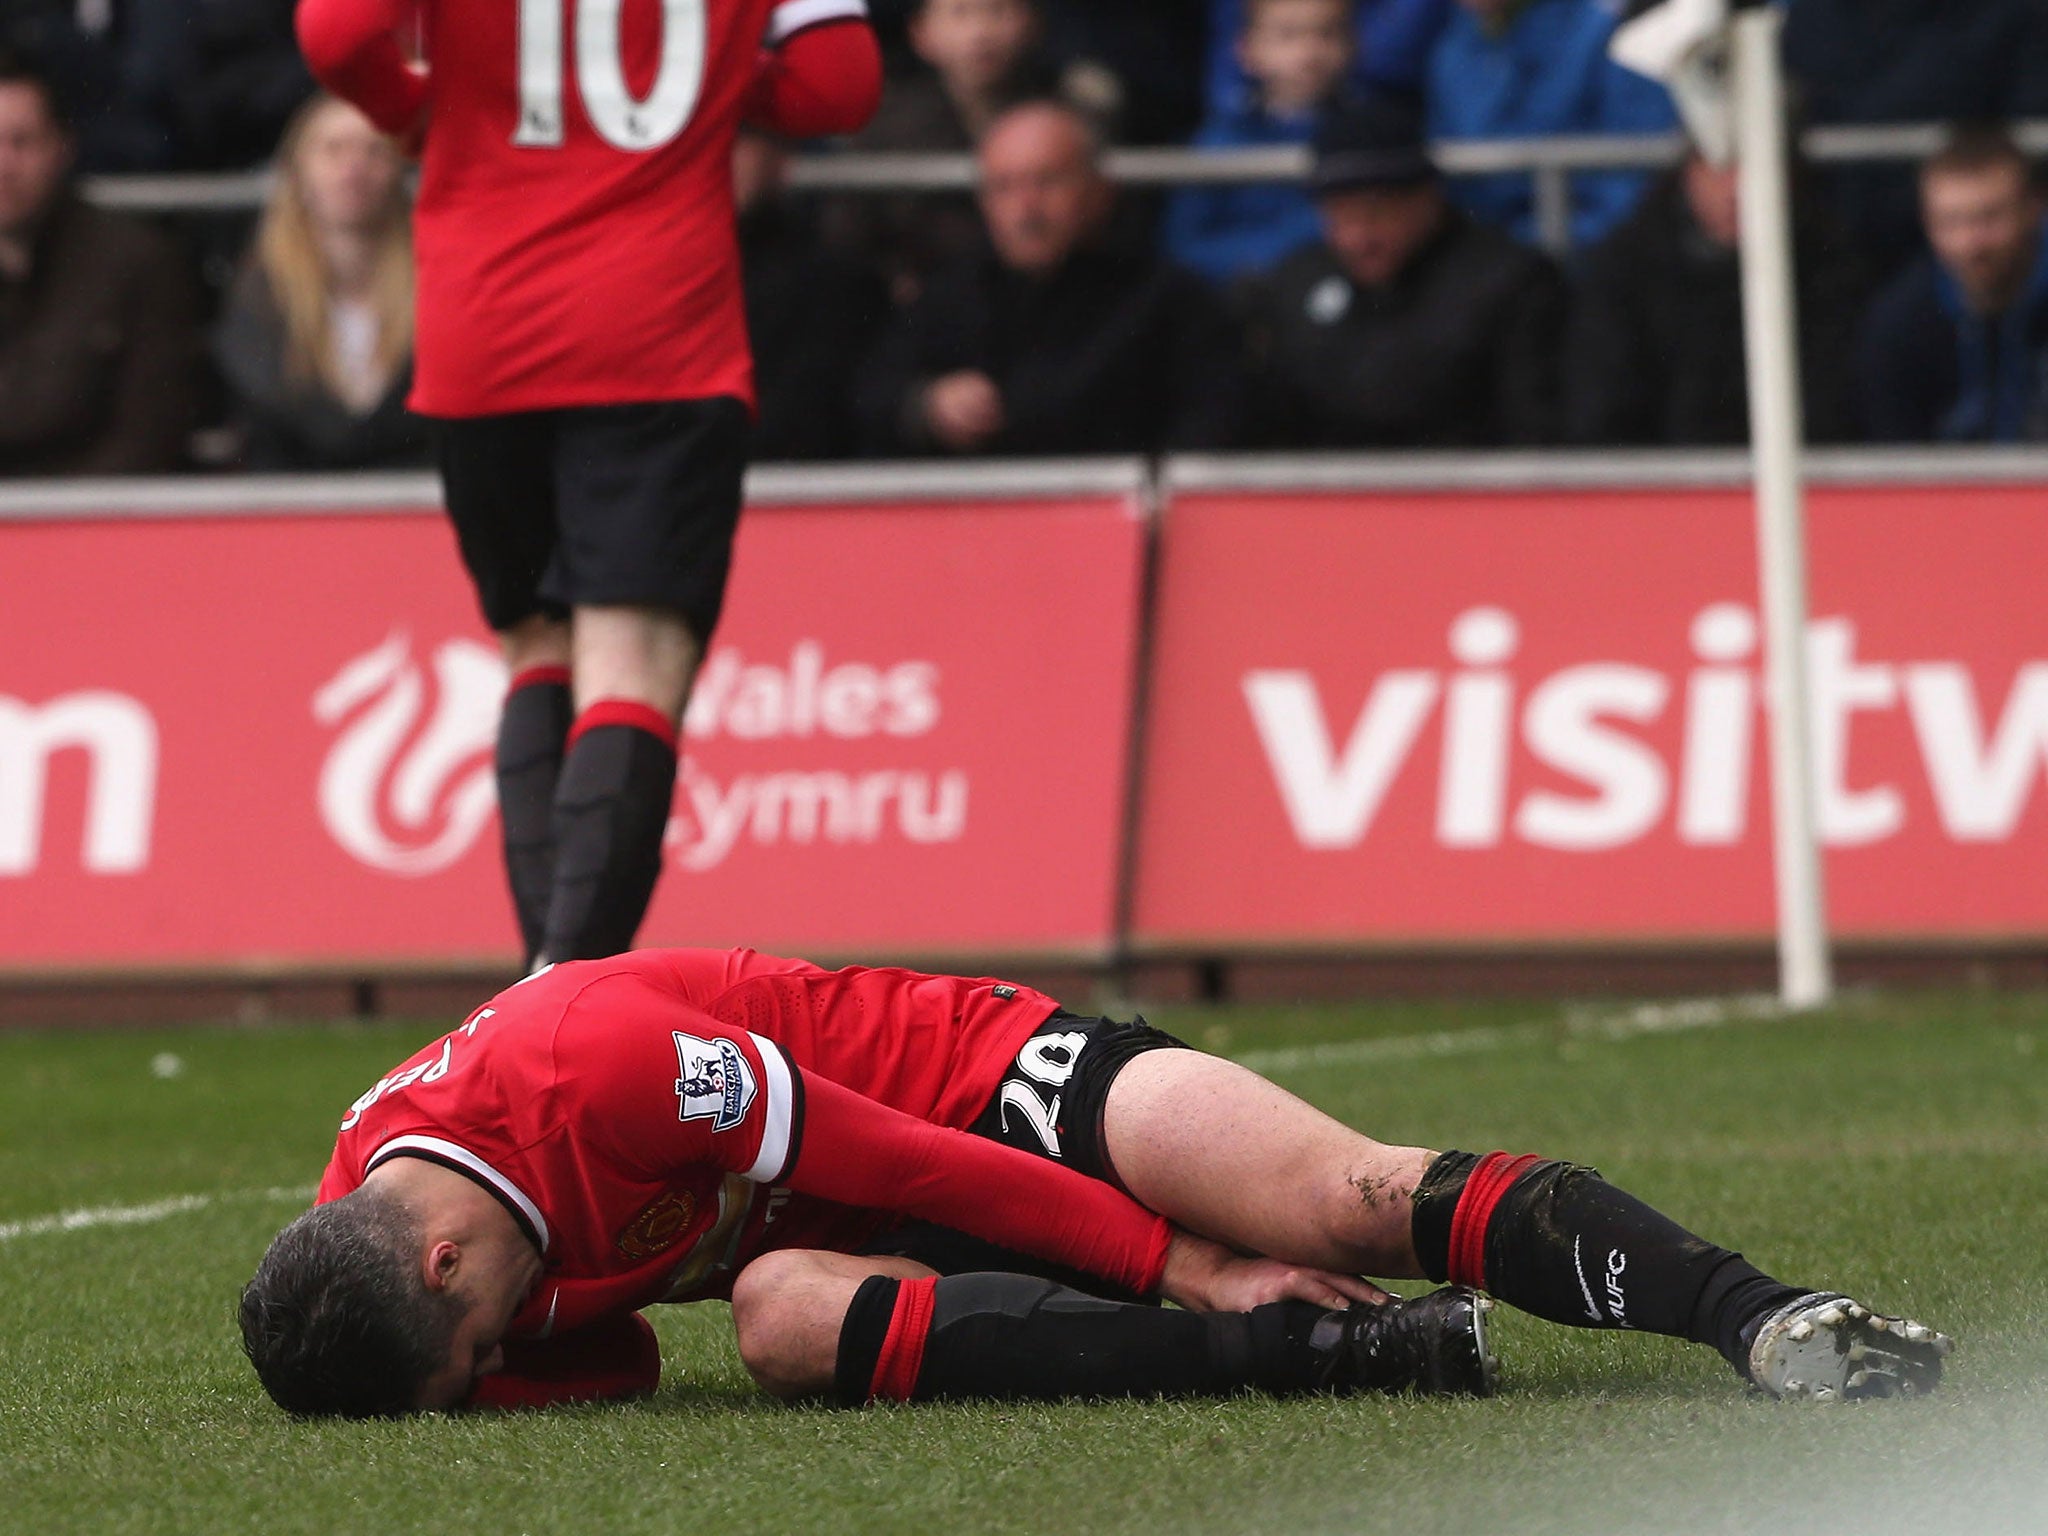 Robin van Persie suffered an ankle injury in the defeat to Swansea